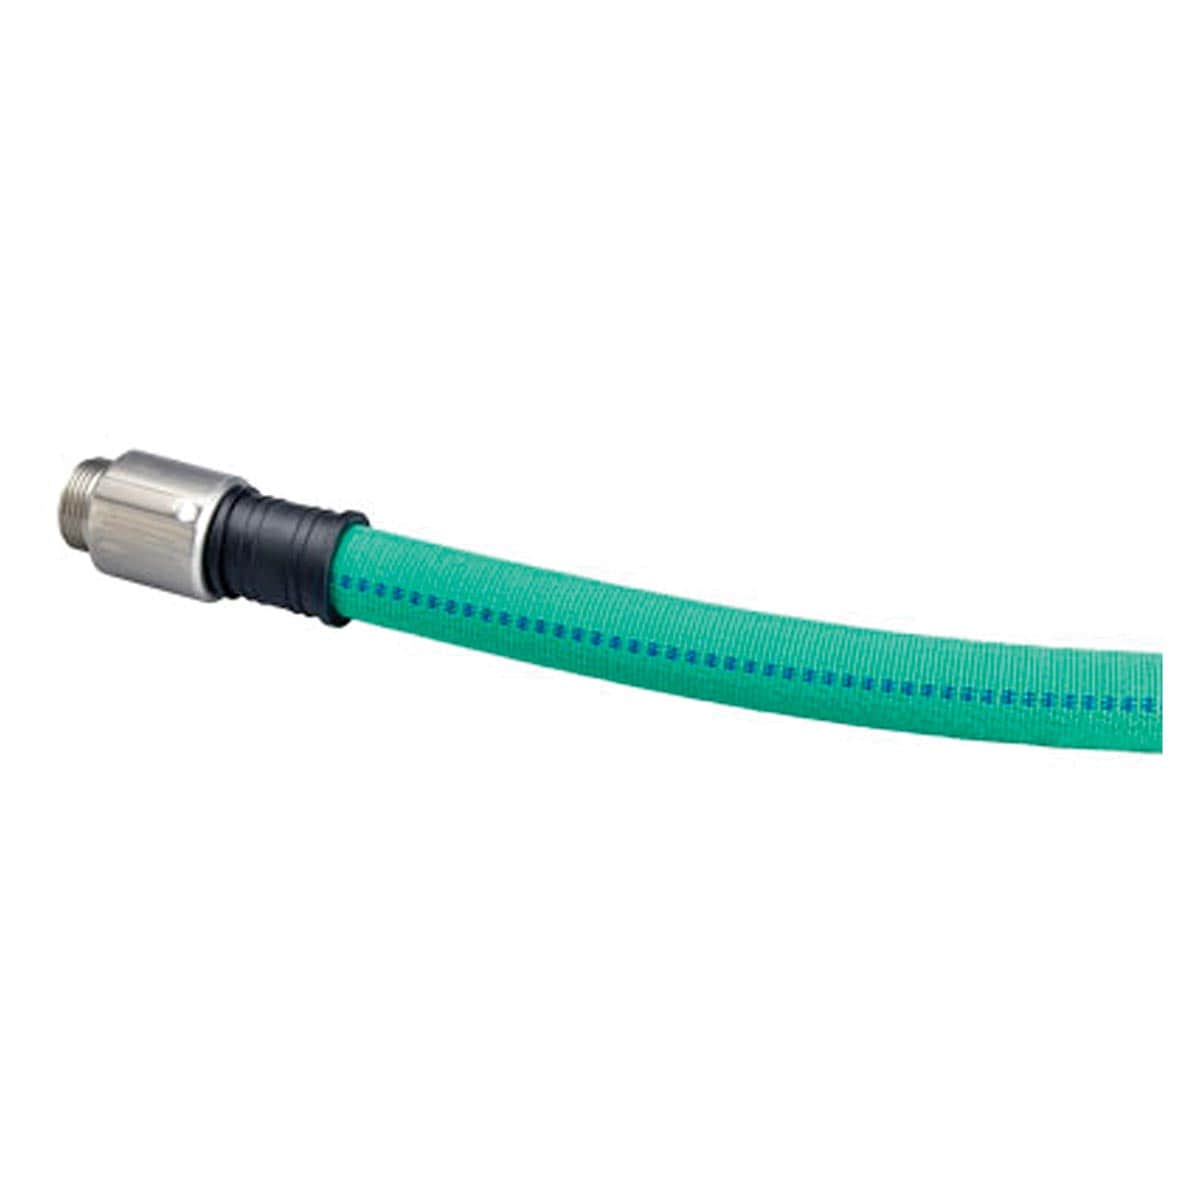 Underhill Featherweight UltraMax Hose, 1 in. x 75 ft.